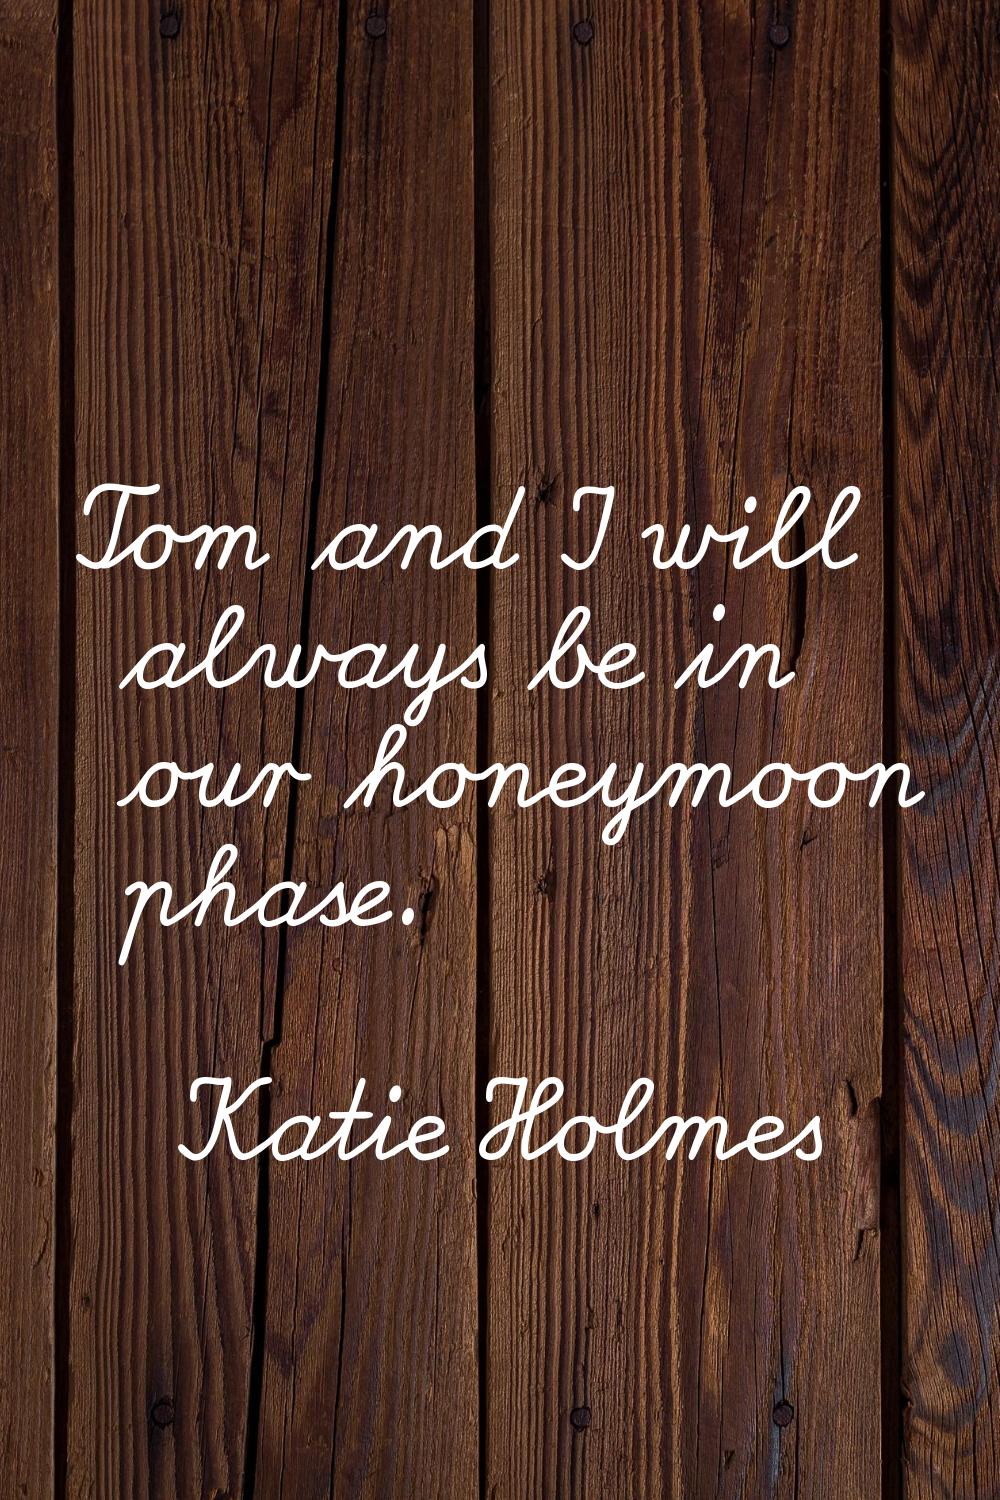 Tom and I will always be in our honeymoon phase.